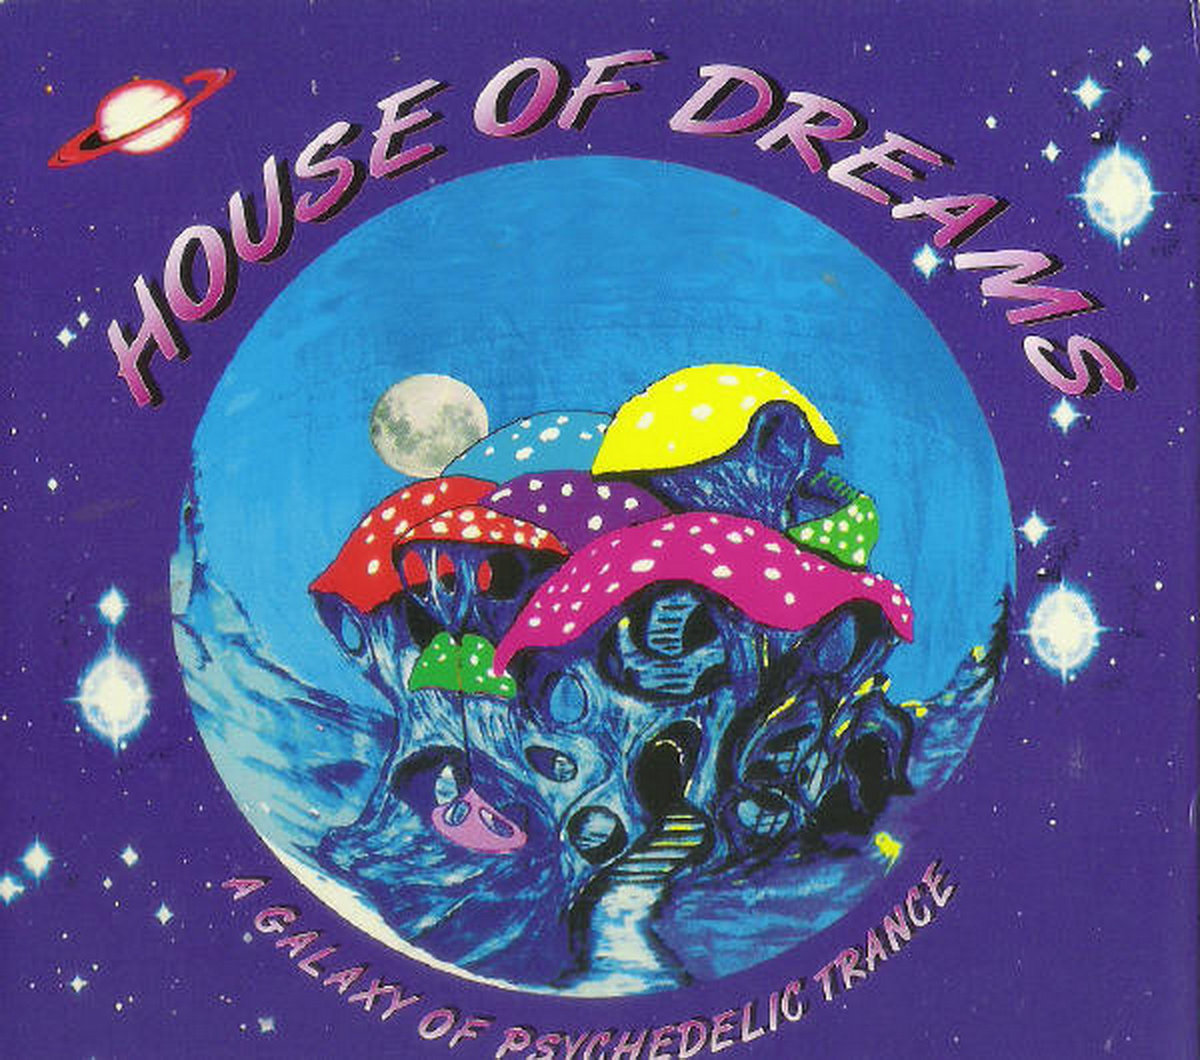 House Of Dreams (A Galaxy Of Psychedelic Trance) (1996)